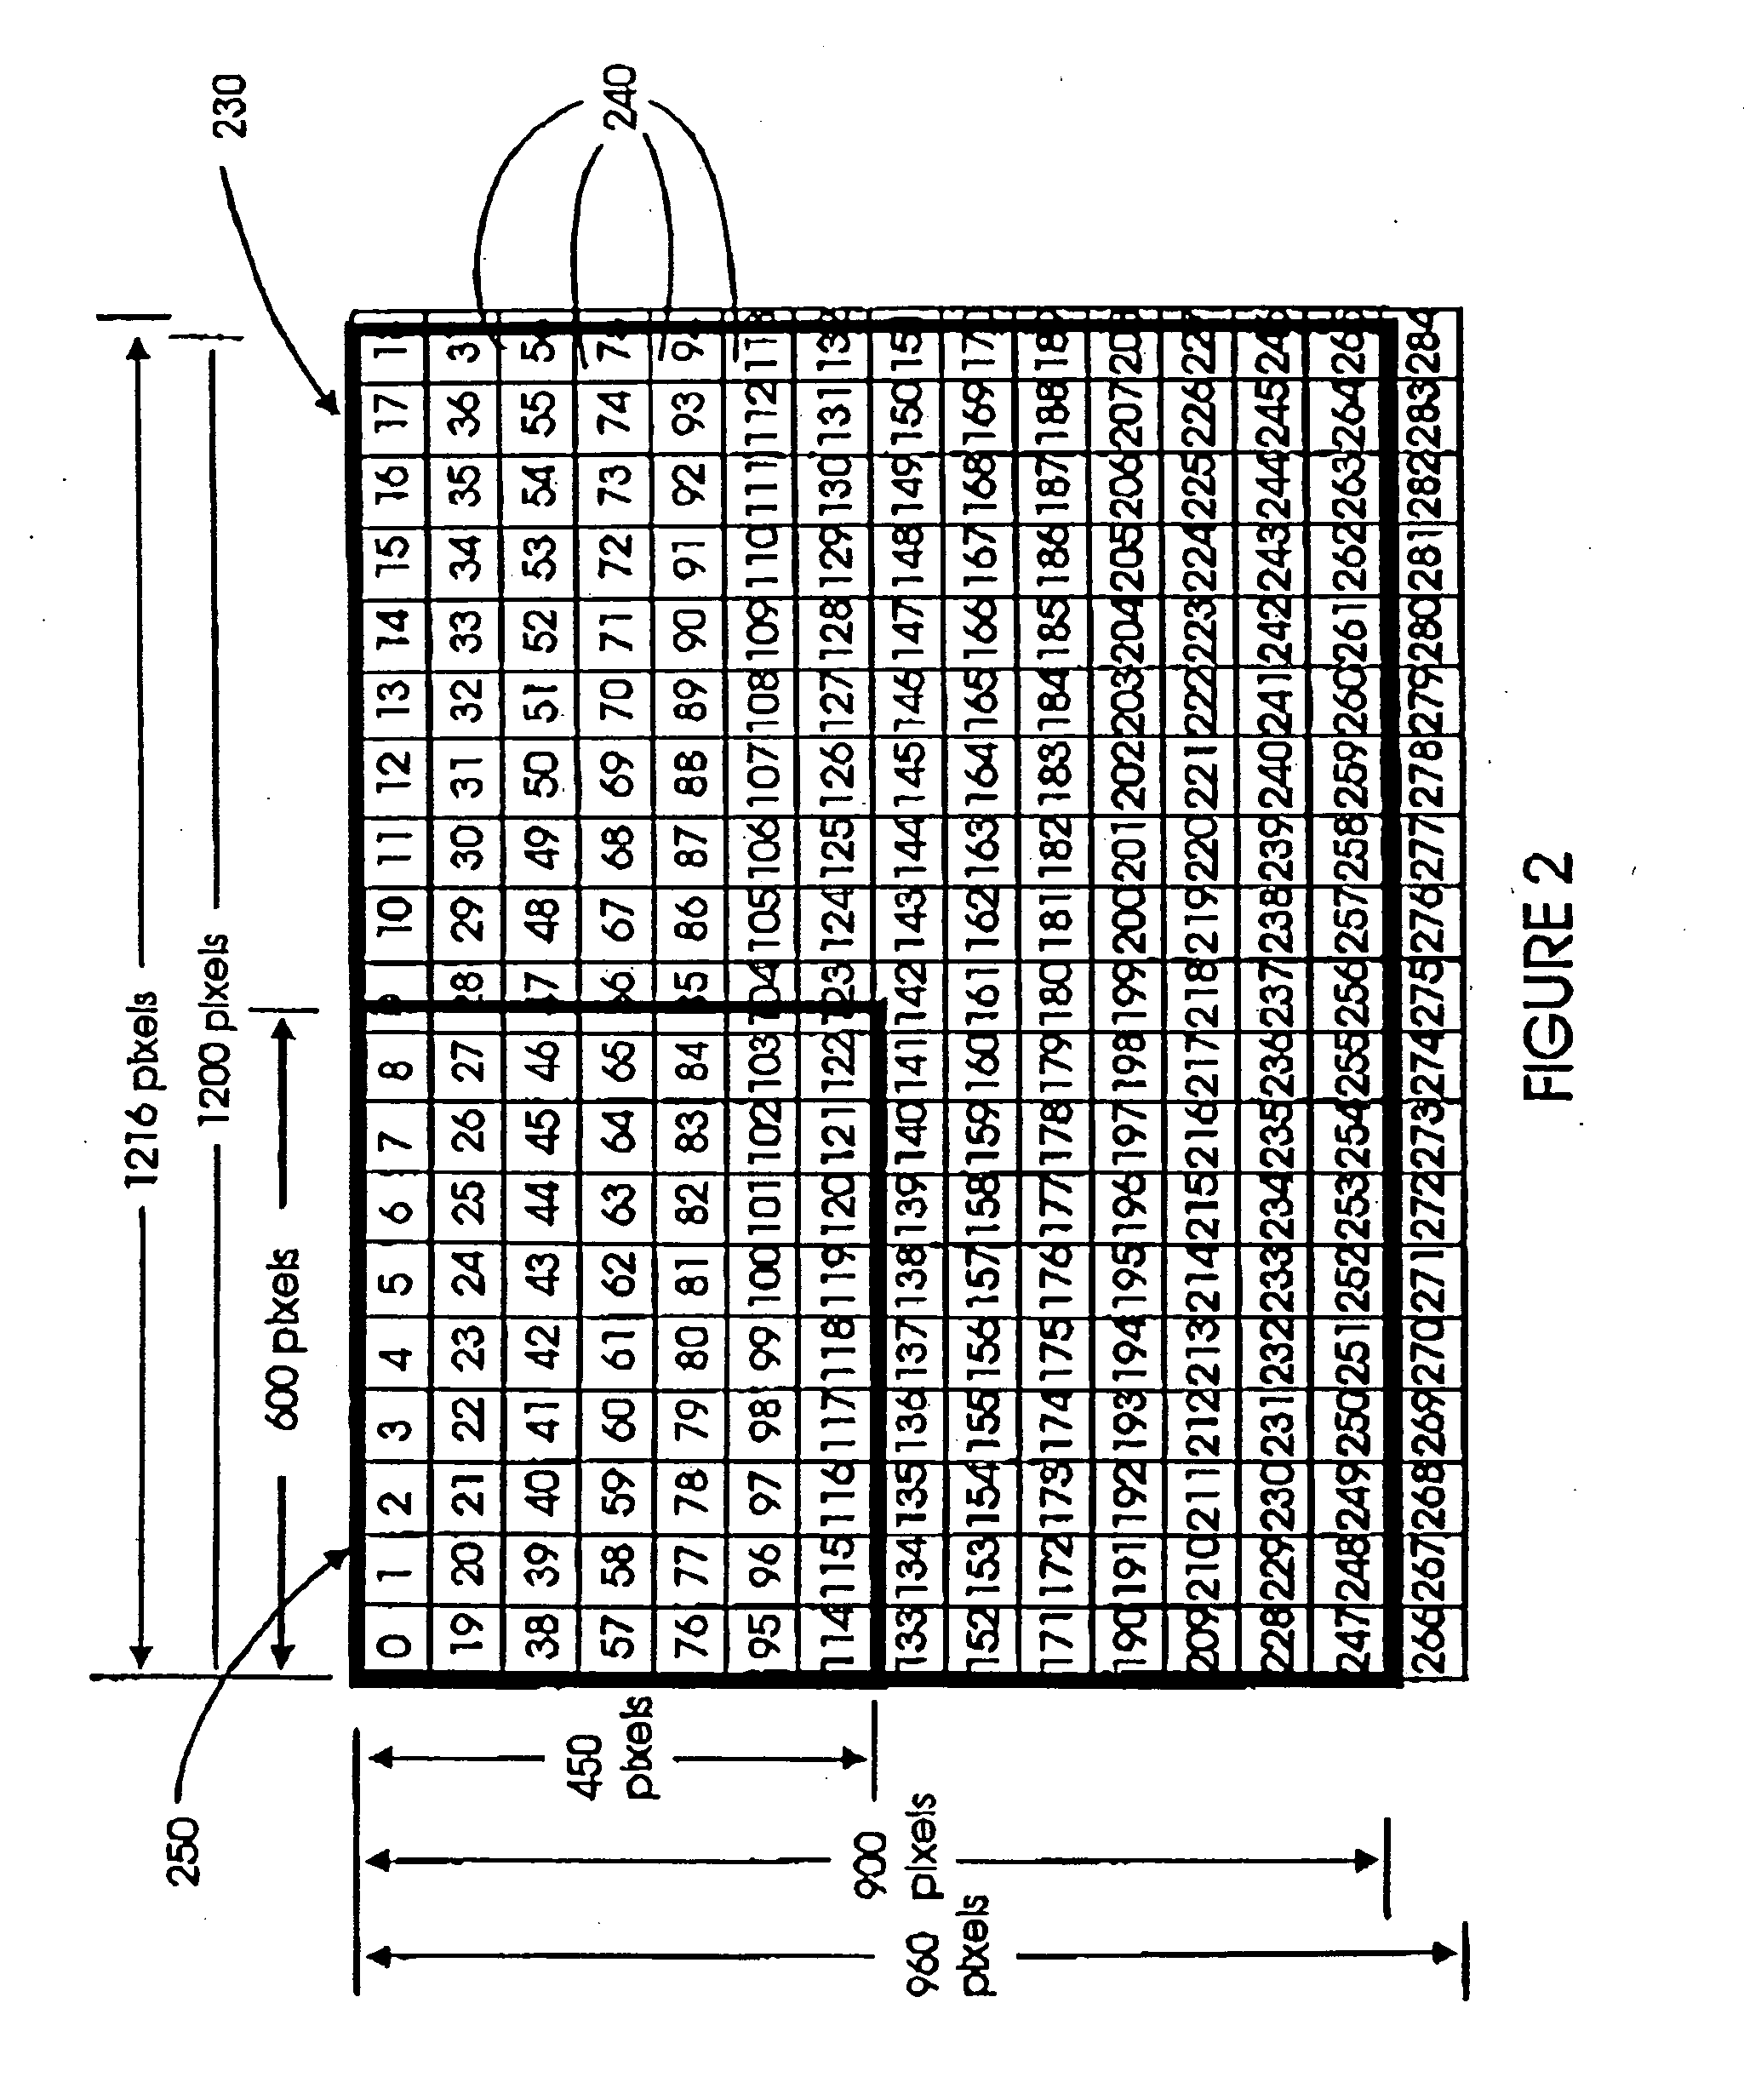 Method and system for viewing scalable documents